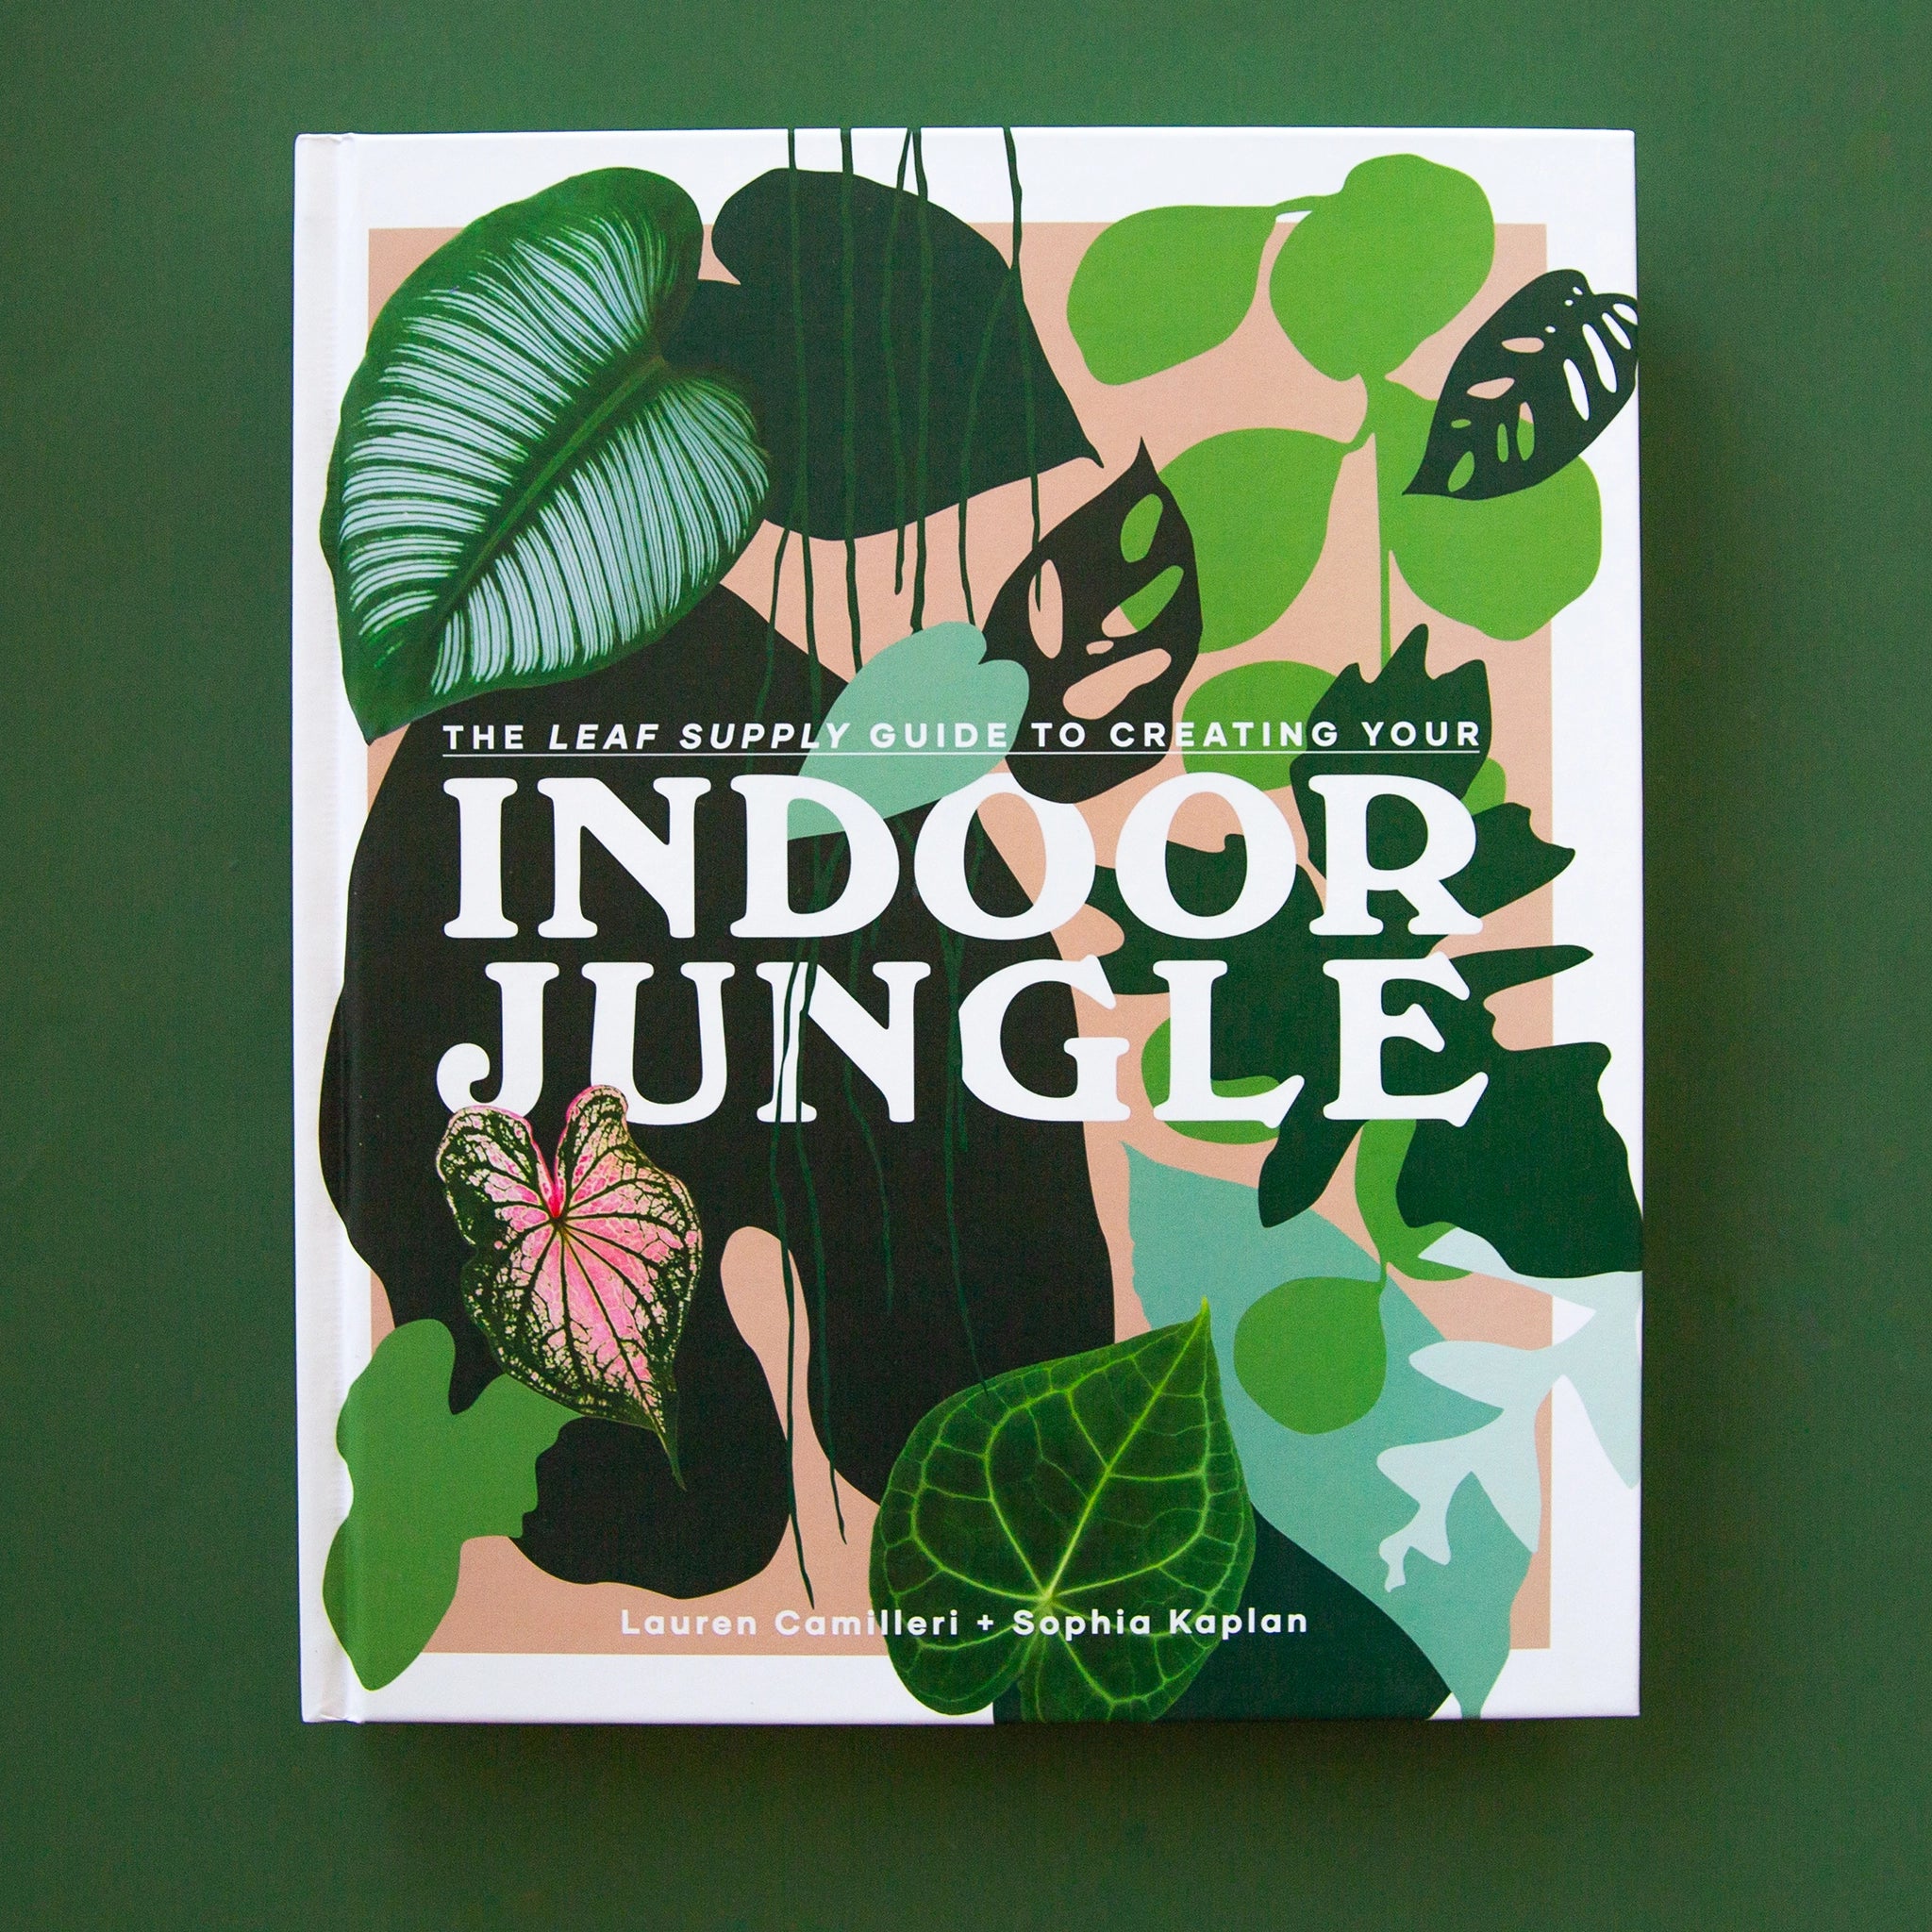 On a green background is a pink and green book cover with a white border and various illustrations of green house plant leaves as well as the title of the book that reads, "The Leaf Supply Guide To Creating Your Indoor Jungle" in white letters.